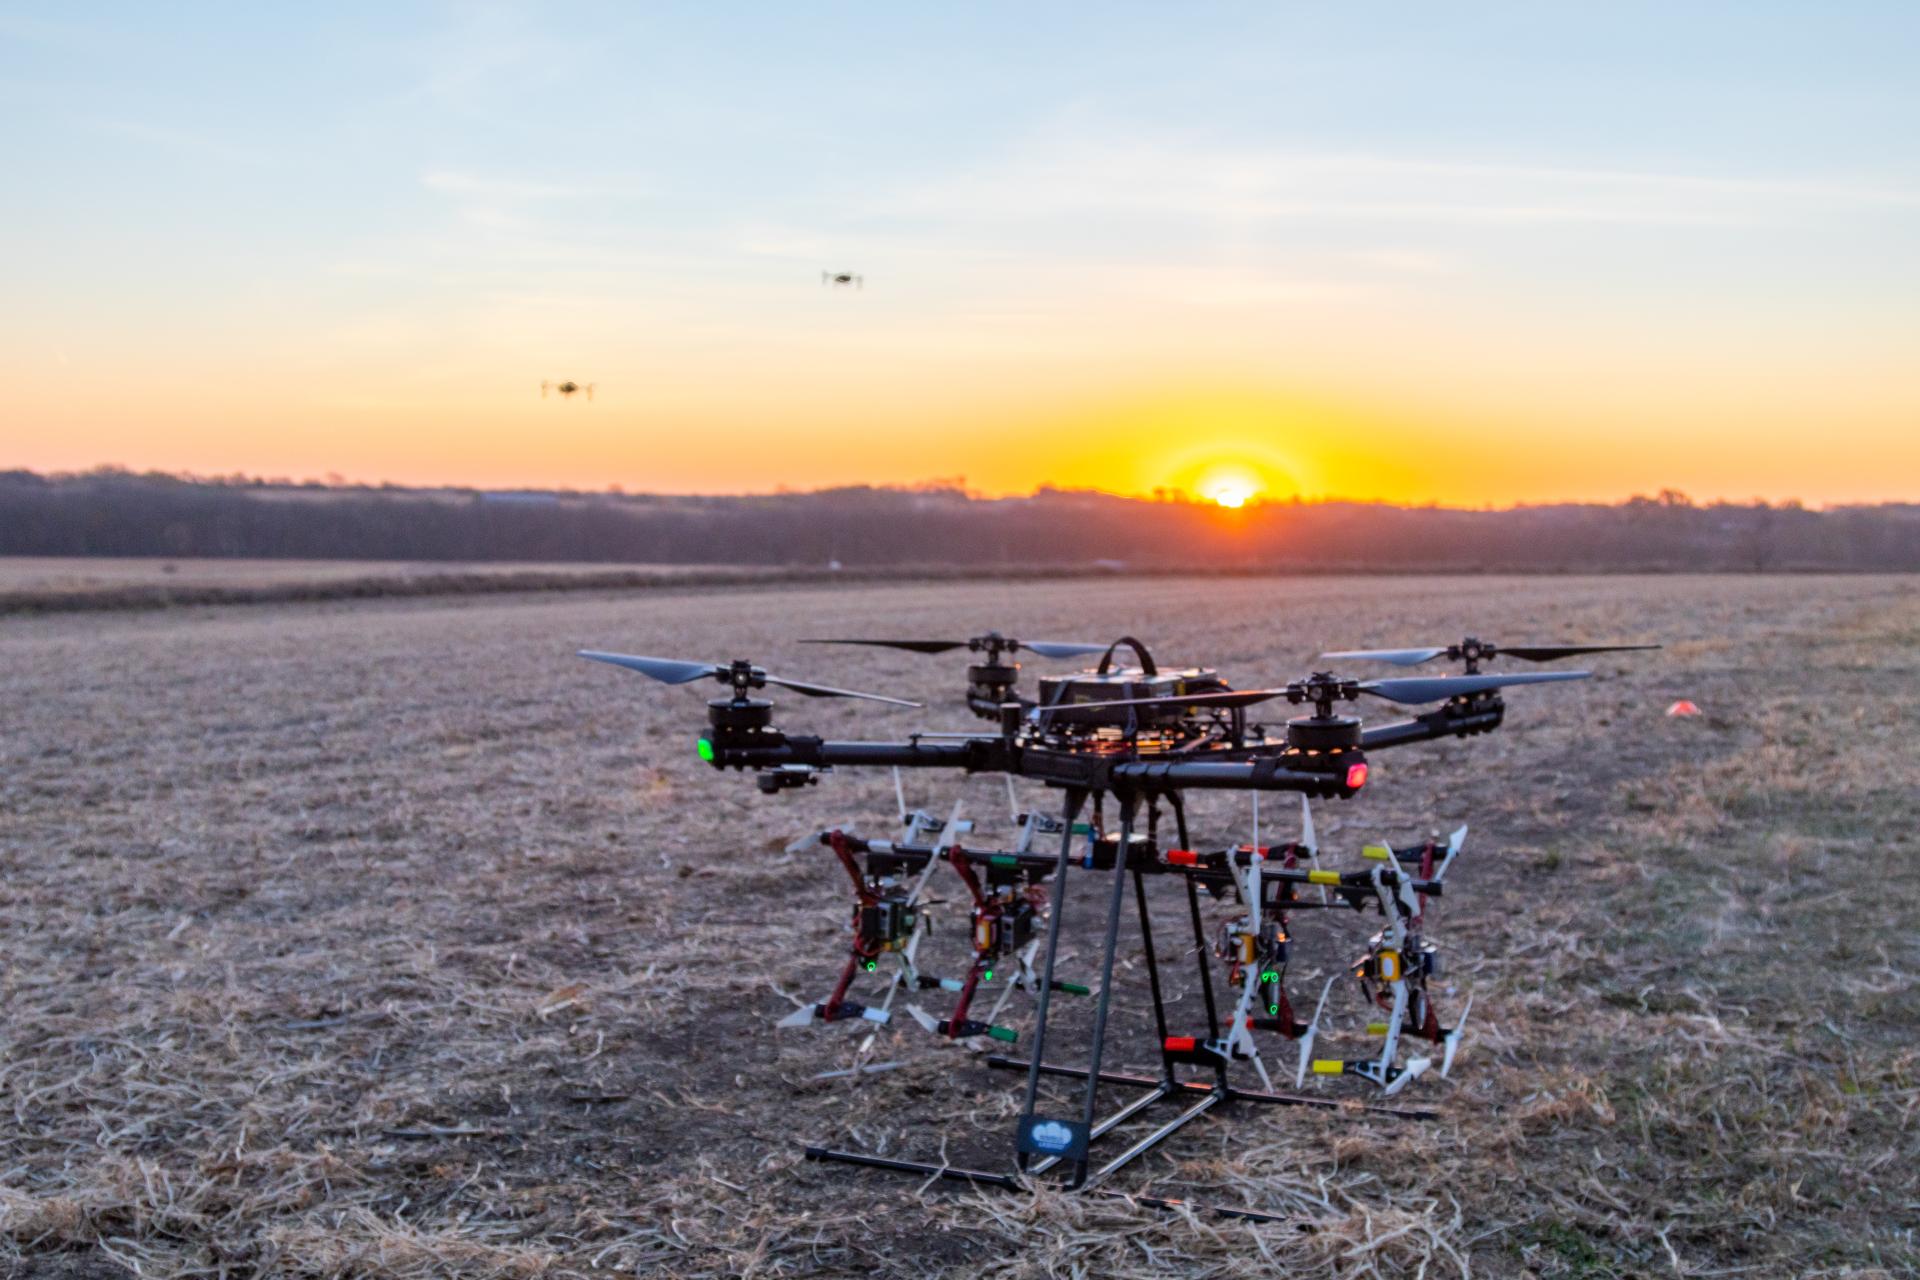 Large drone carrying 4 small drones at sunrise with two small drones hovering in background